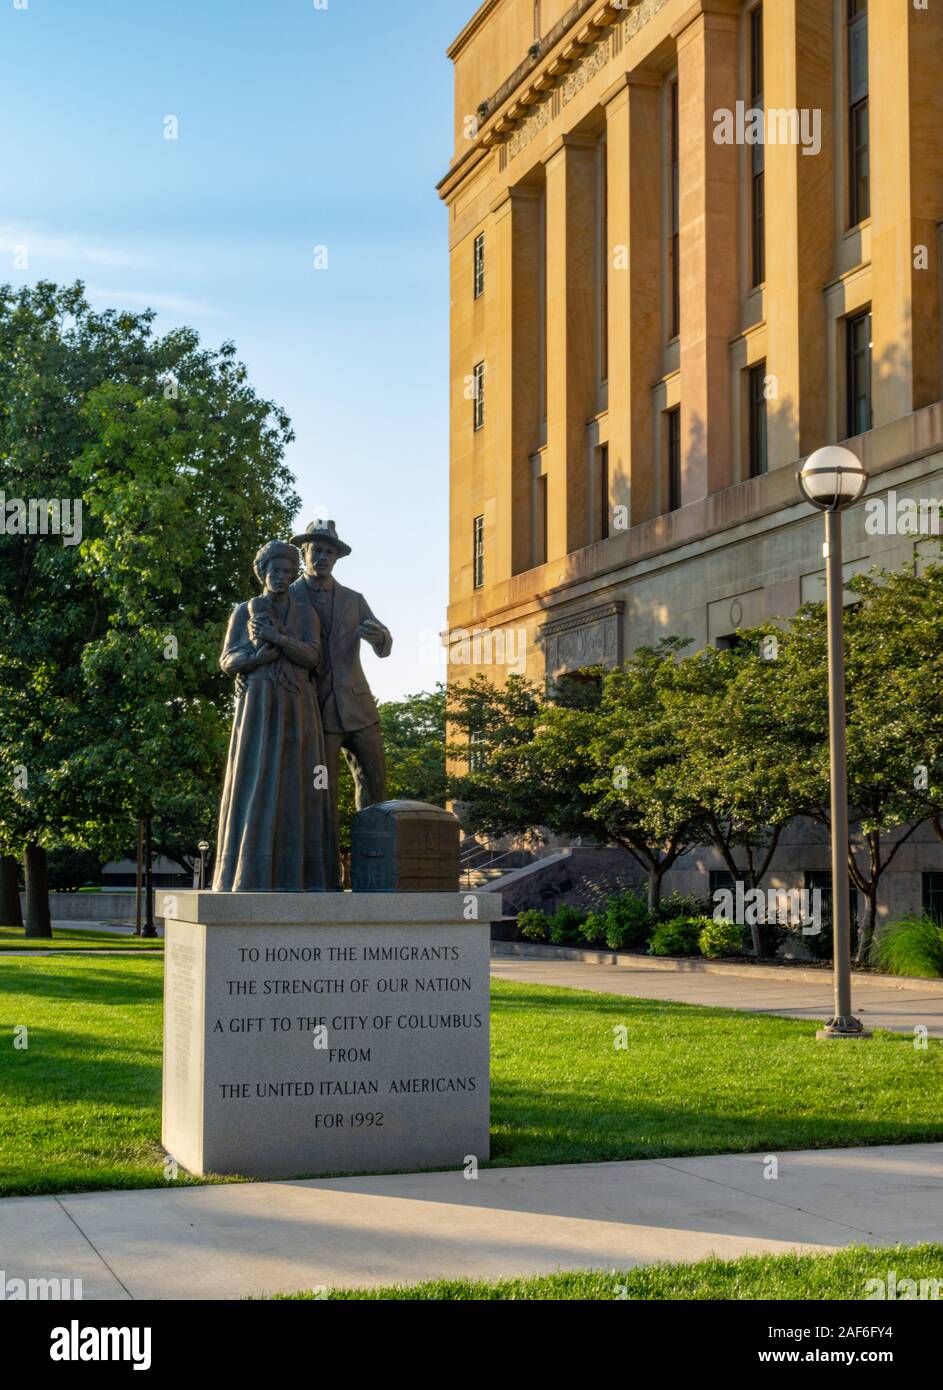 Columbus, Ohio - August 3, 2019: A statue in honor of the immigrants to America in Columbus, Ohio on August 3, 2019. Stock Photo